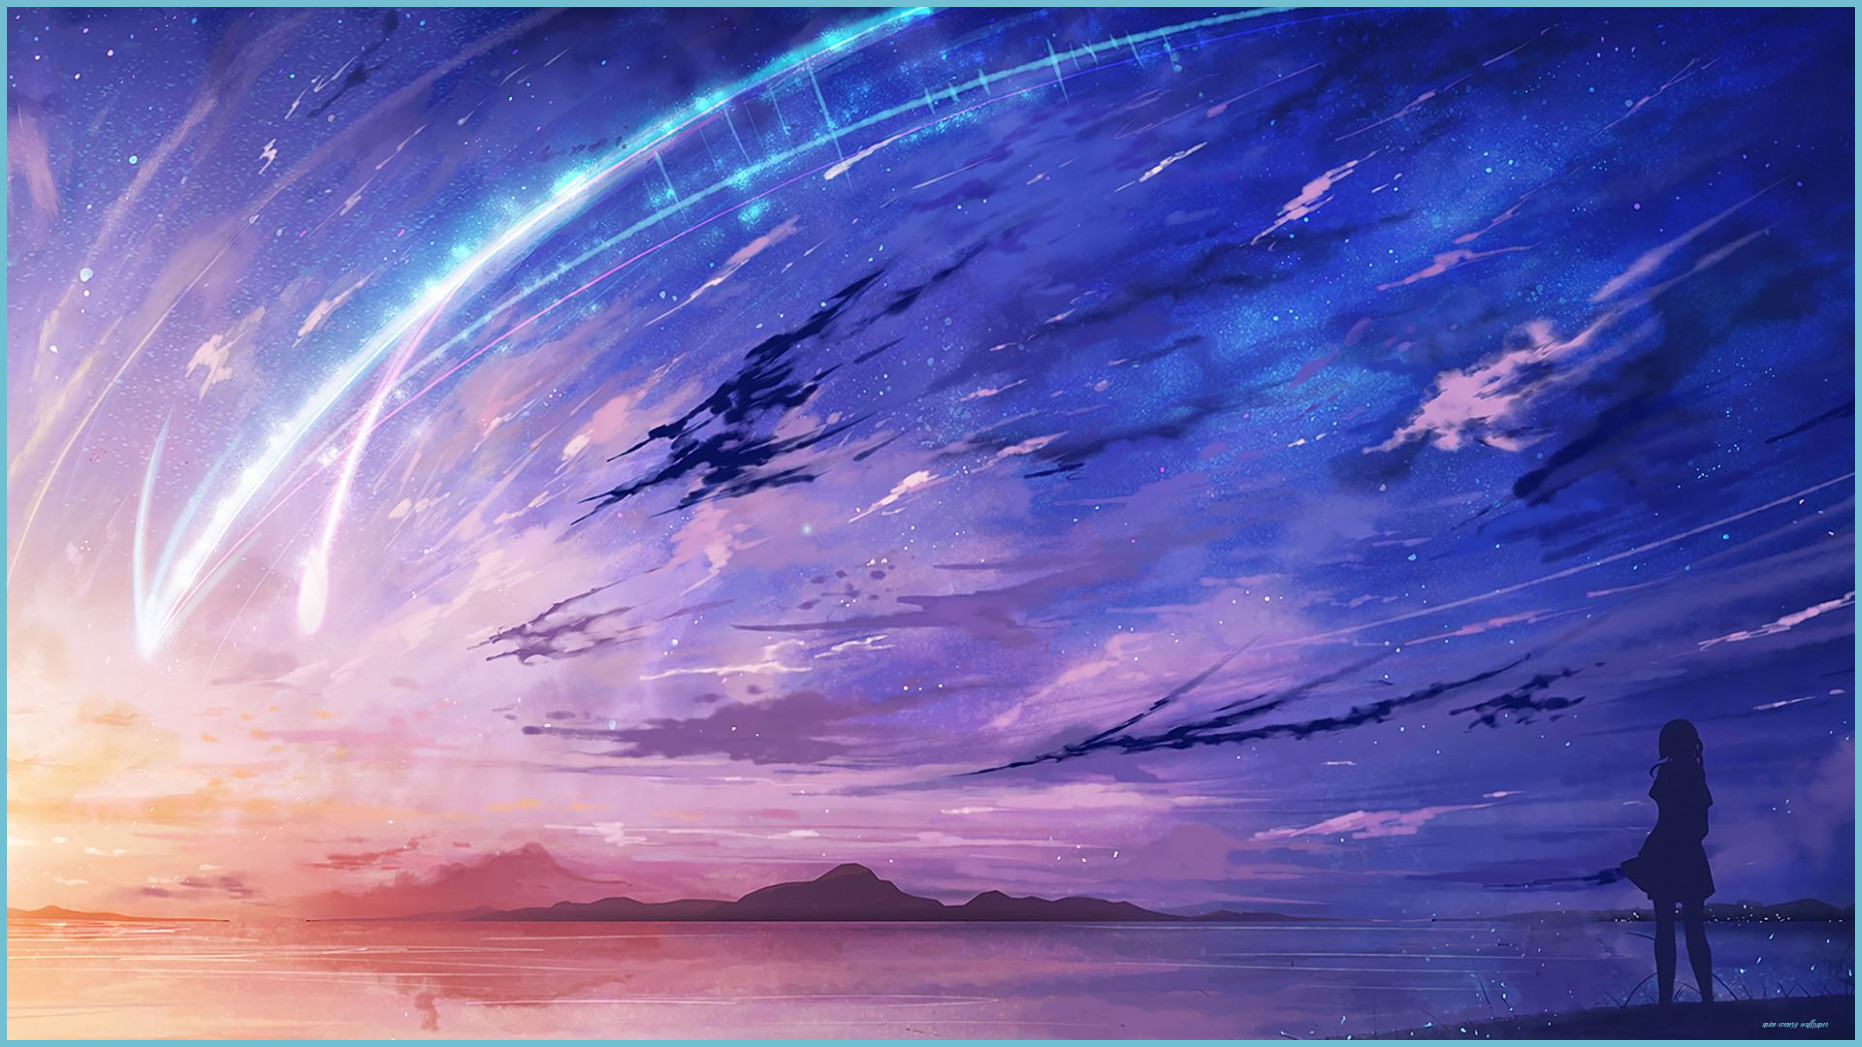 Your Name Anime Landscape Wallpaper Free Your Name Anime Scenery Wallpaper